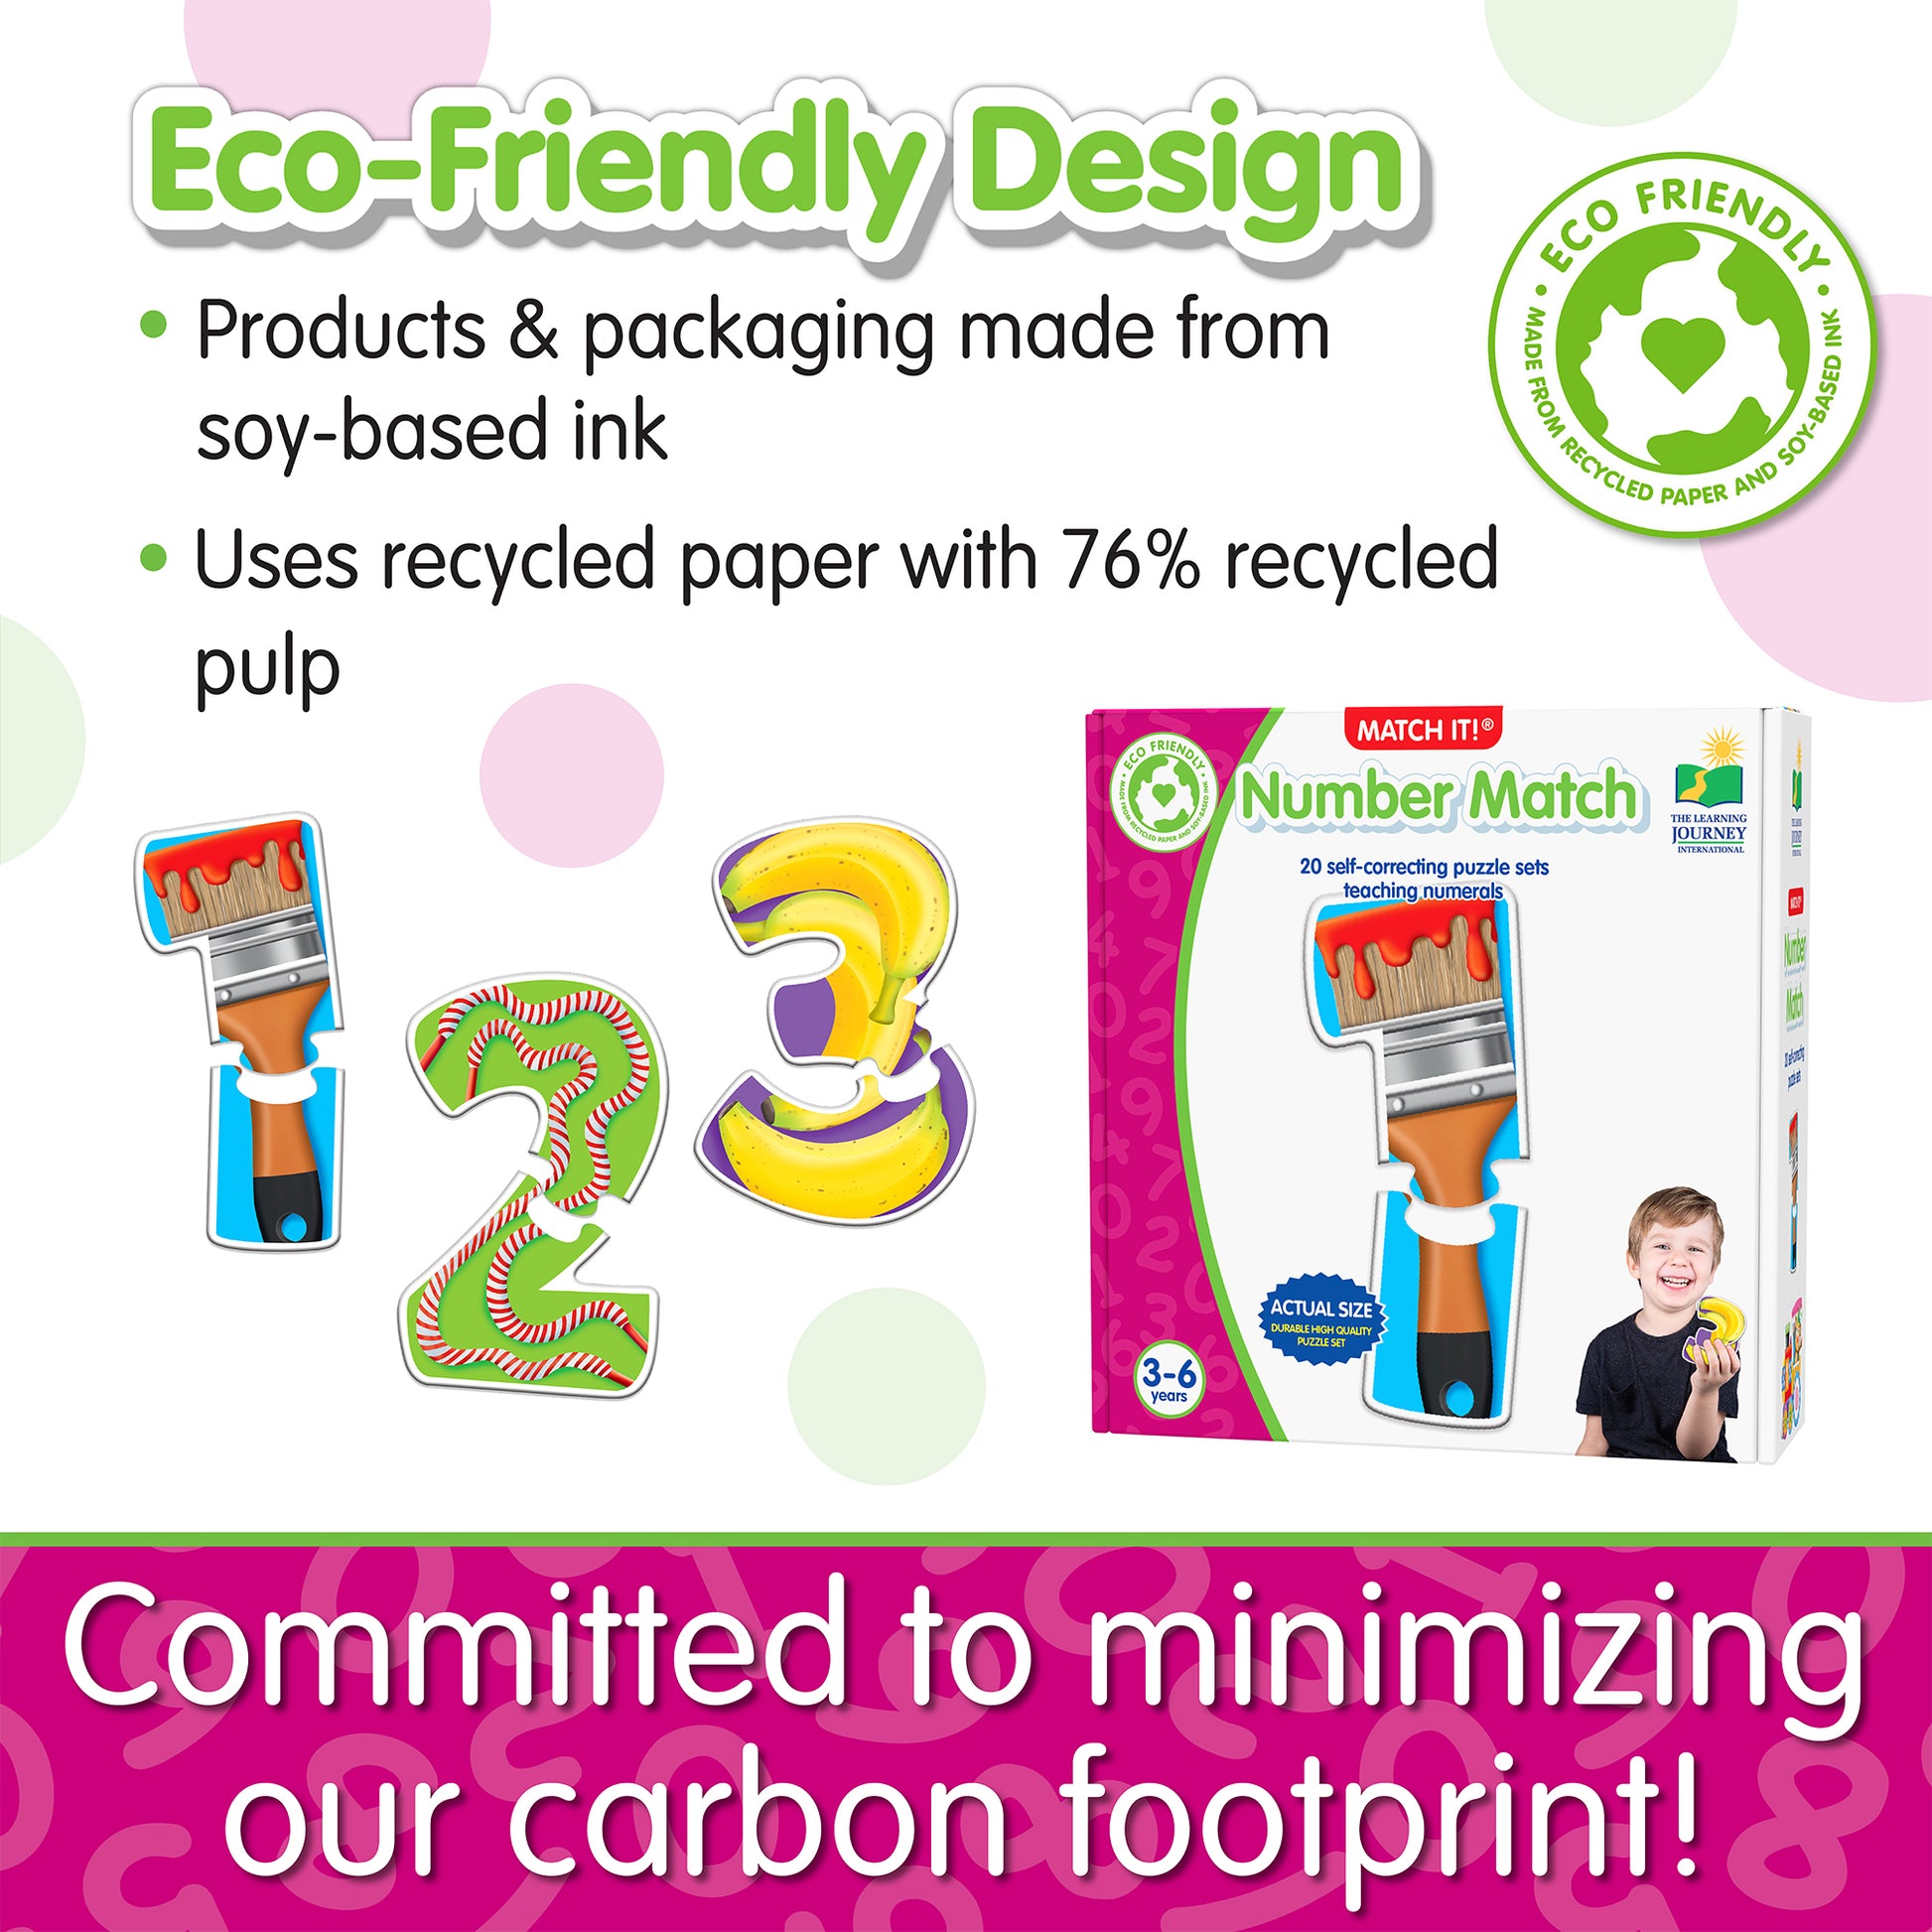 Infographic about Number Match's eco-friendly design